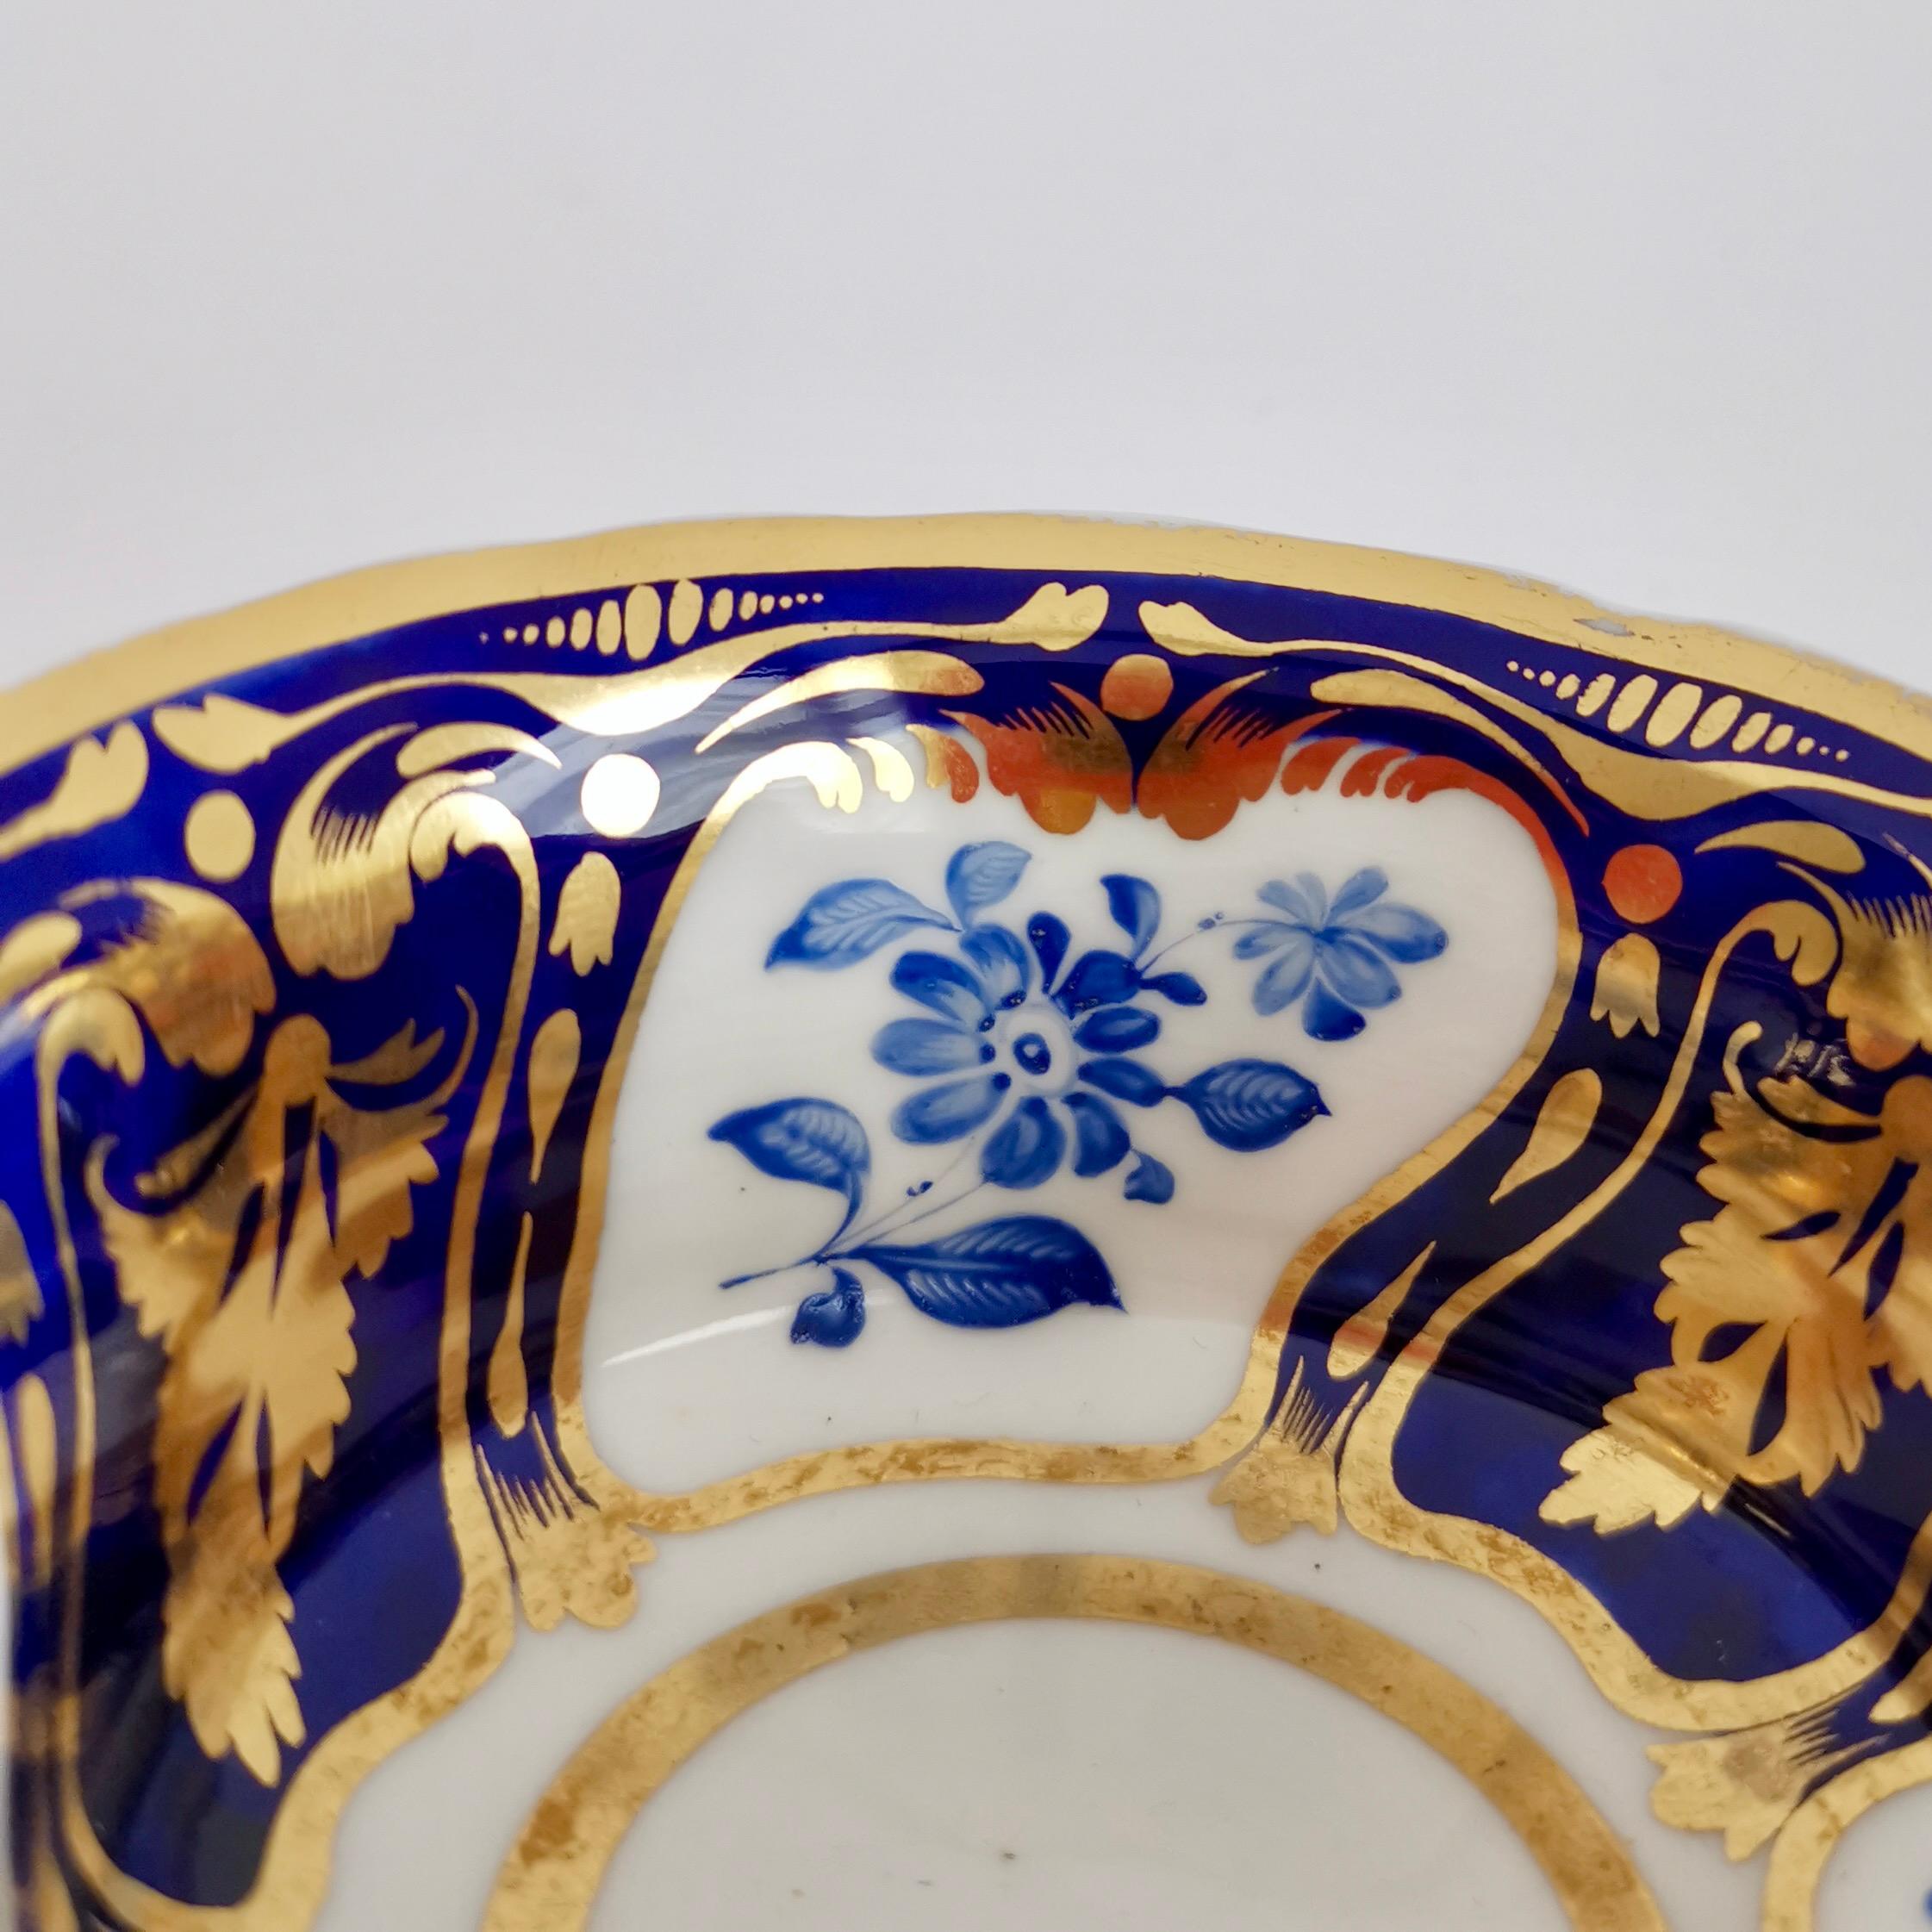 Ridgway Porcelain Teacup and Saucer, Blue Flowers and Gilt, Regency, Ca 1825 For Sale 2